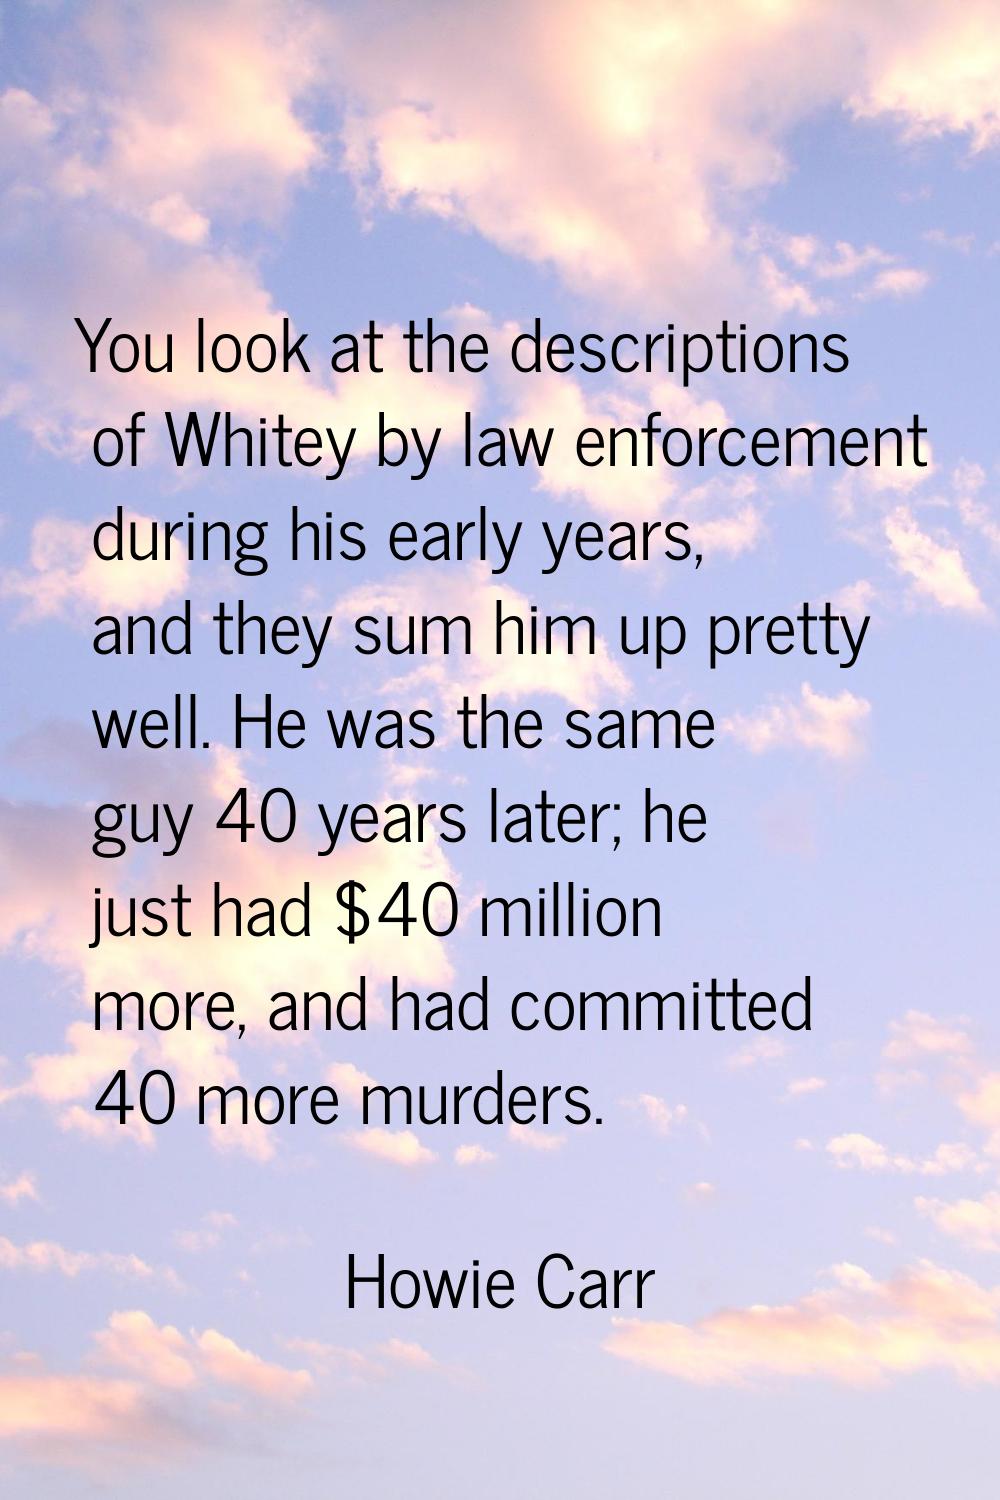 You look at the descriptions of Whitey by law enforcement during his early years, and they sum him 